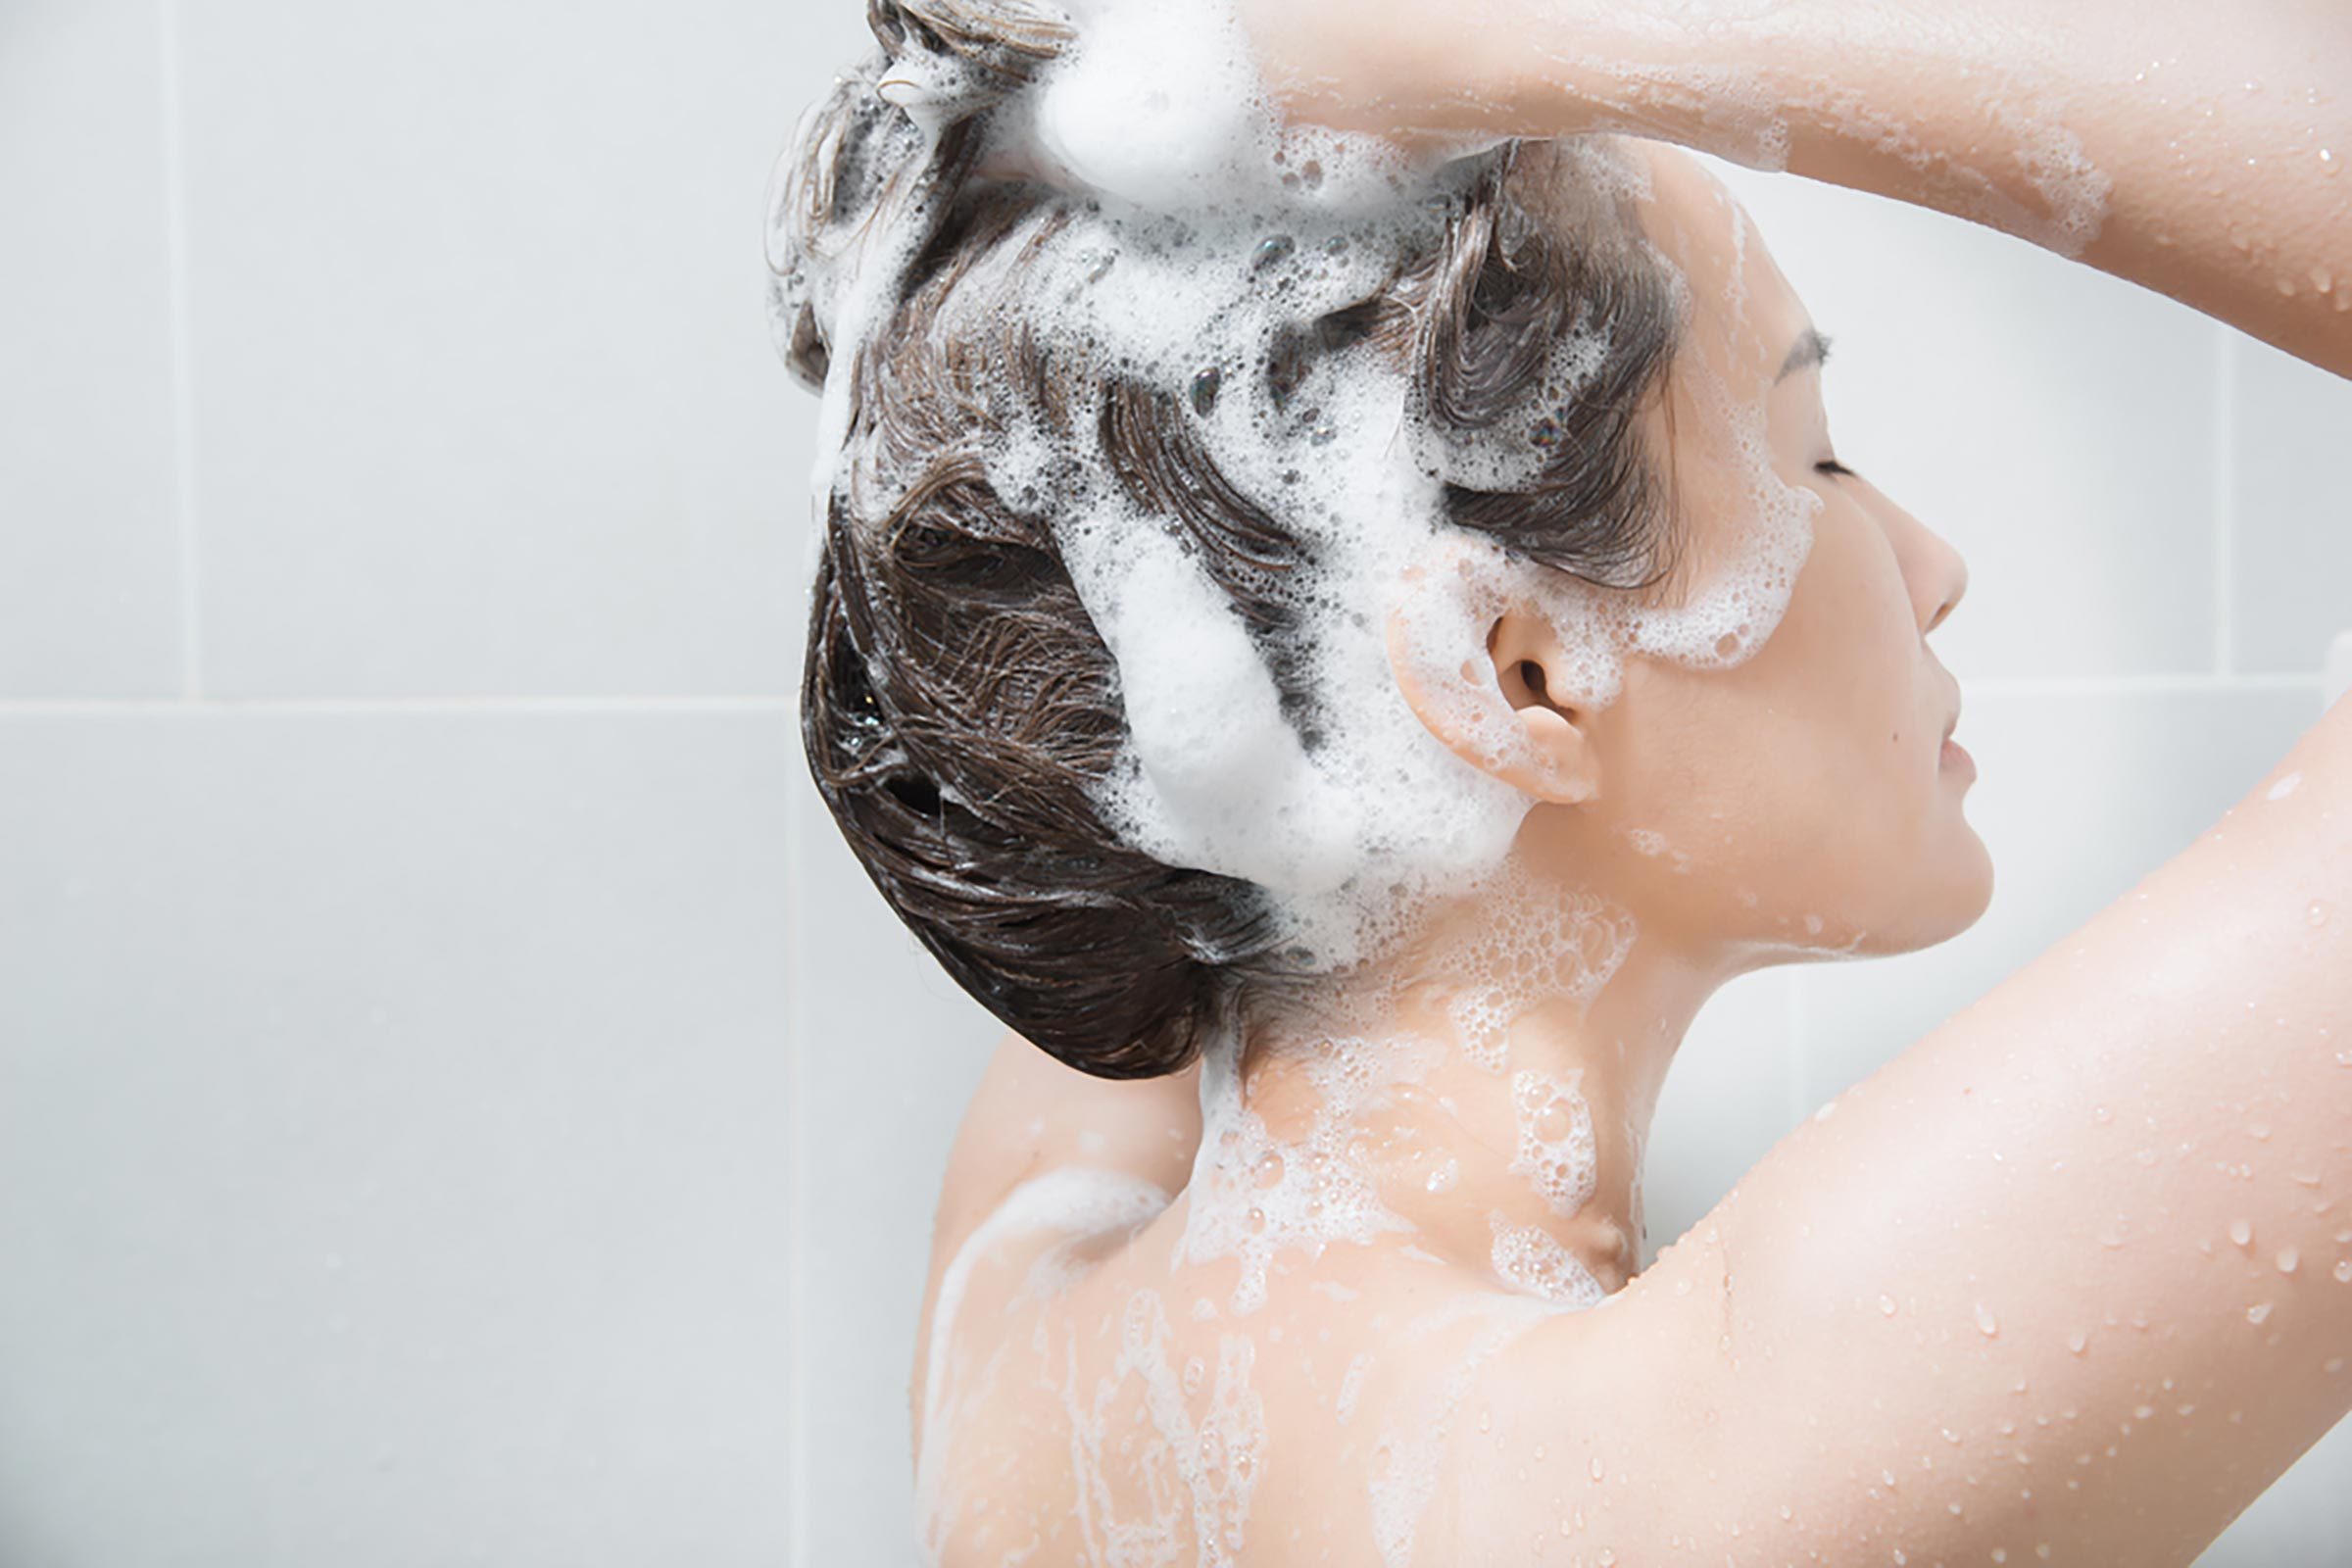 9 Common Skin-Care Ingredients That Are Making You Break Out